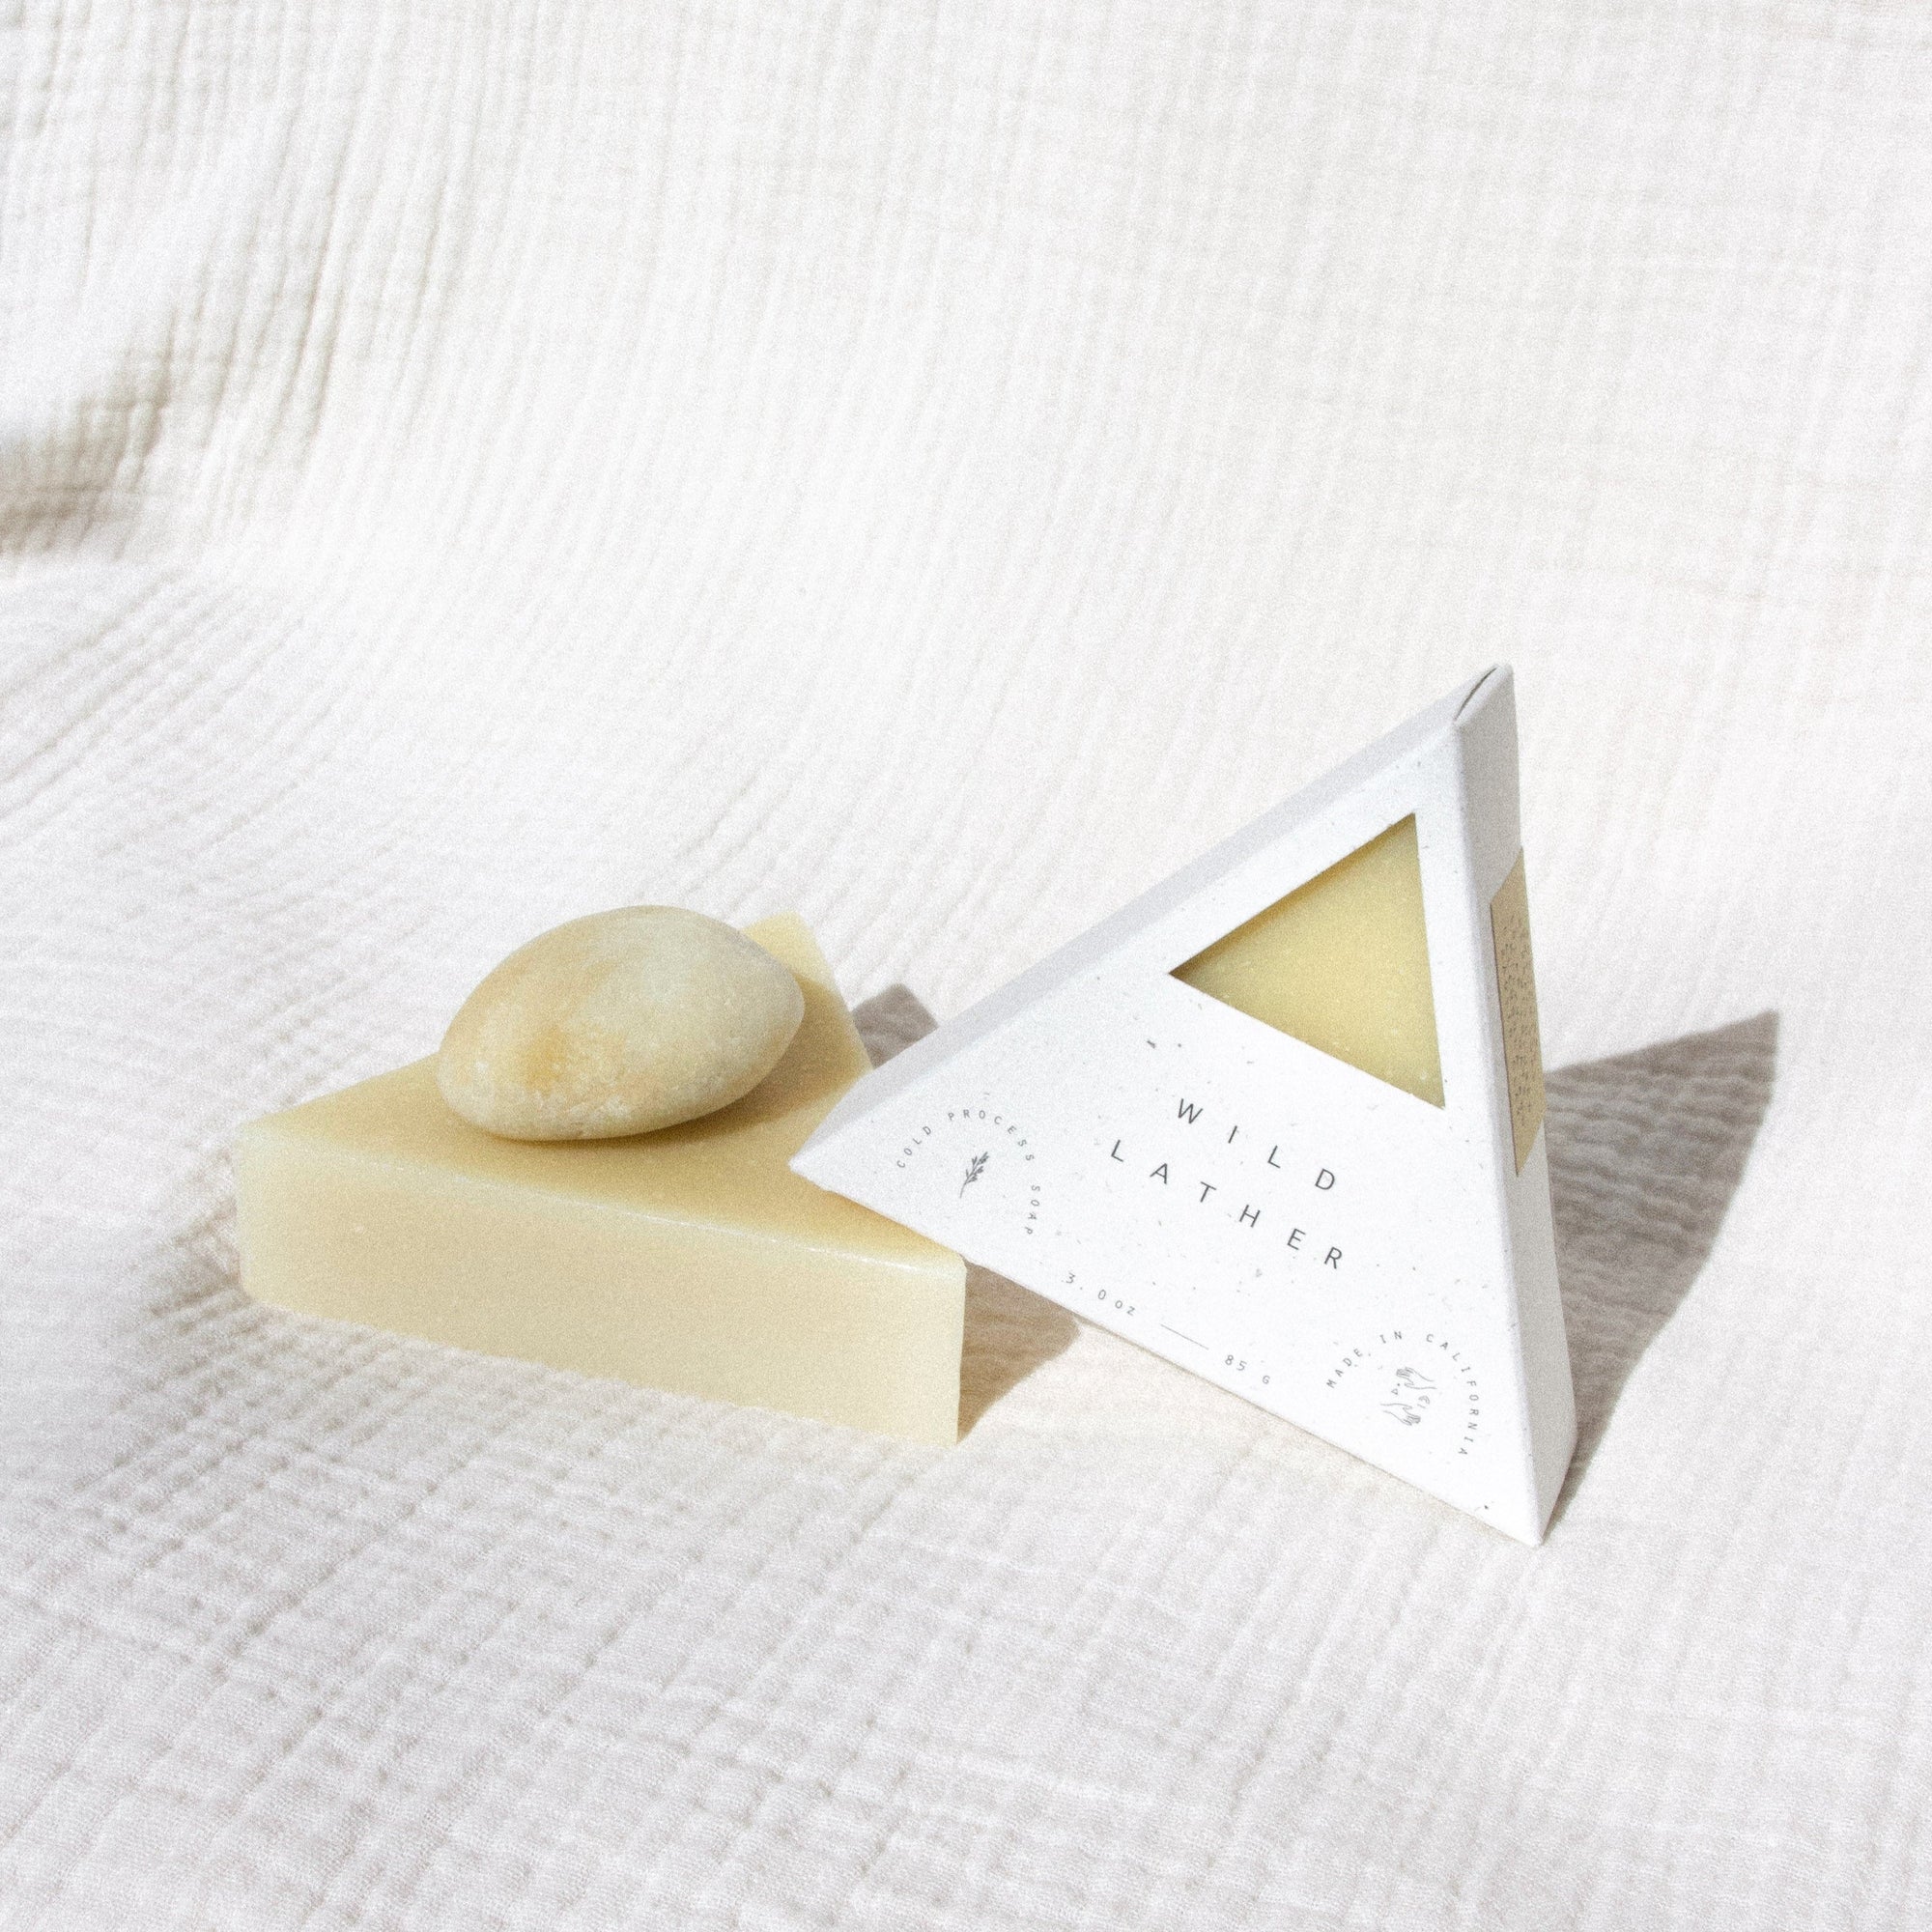 Two triangle soaps and a stone balancing against a textured cream cloth